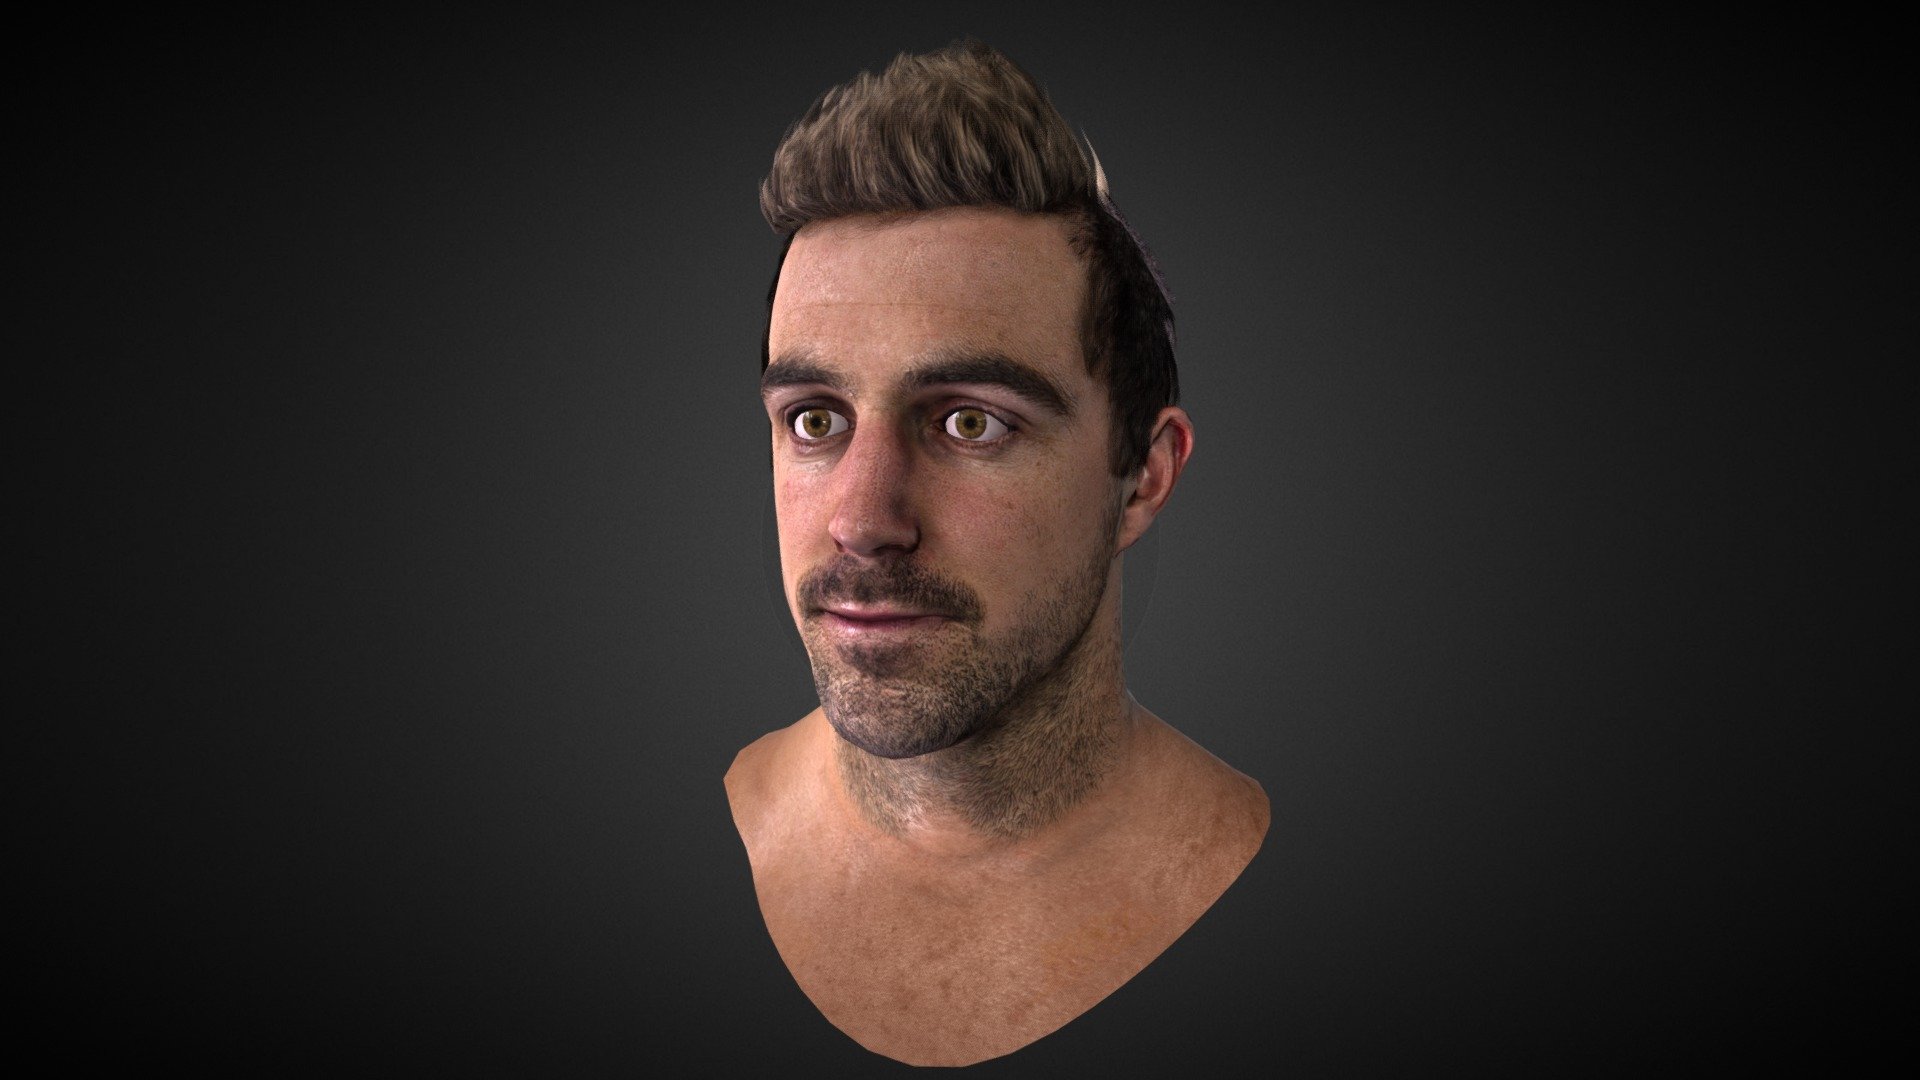 A head model of the AFL player, for PC game. This is complete PBR workflow with facial scans being taken and the model along with texture being developed based on those scans 3d model